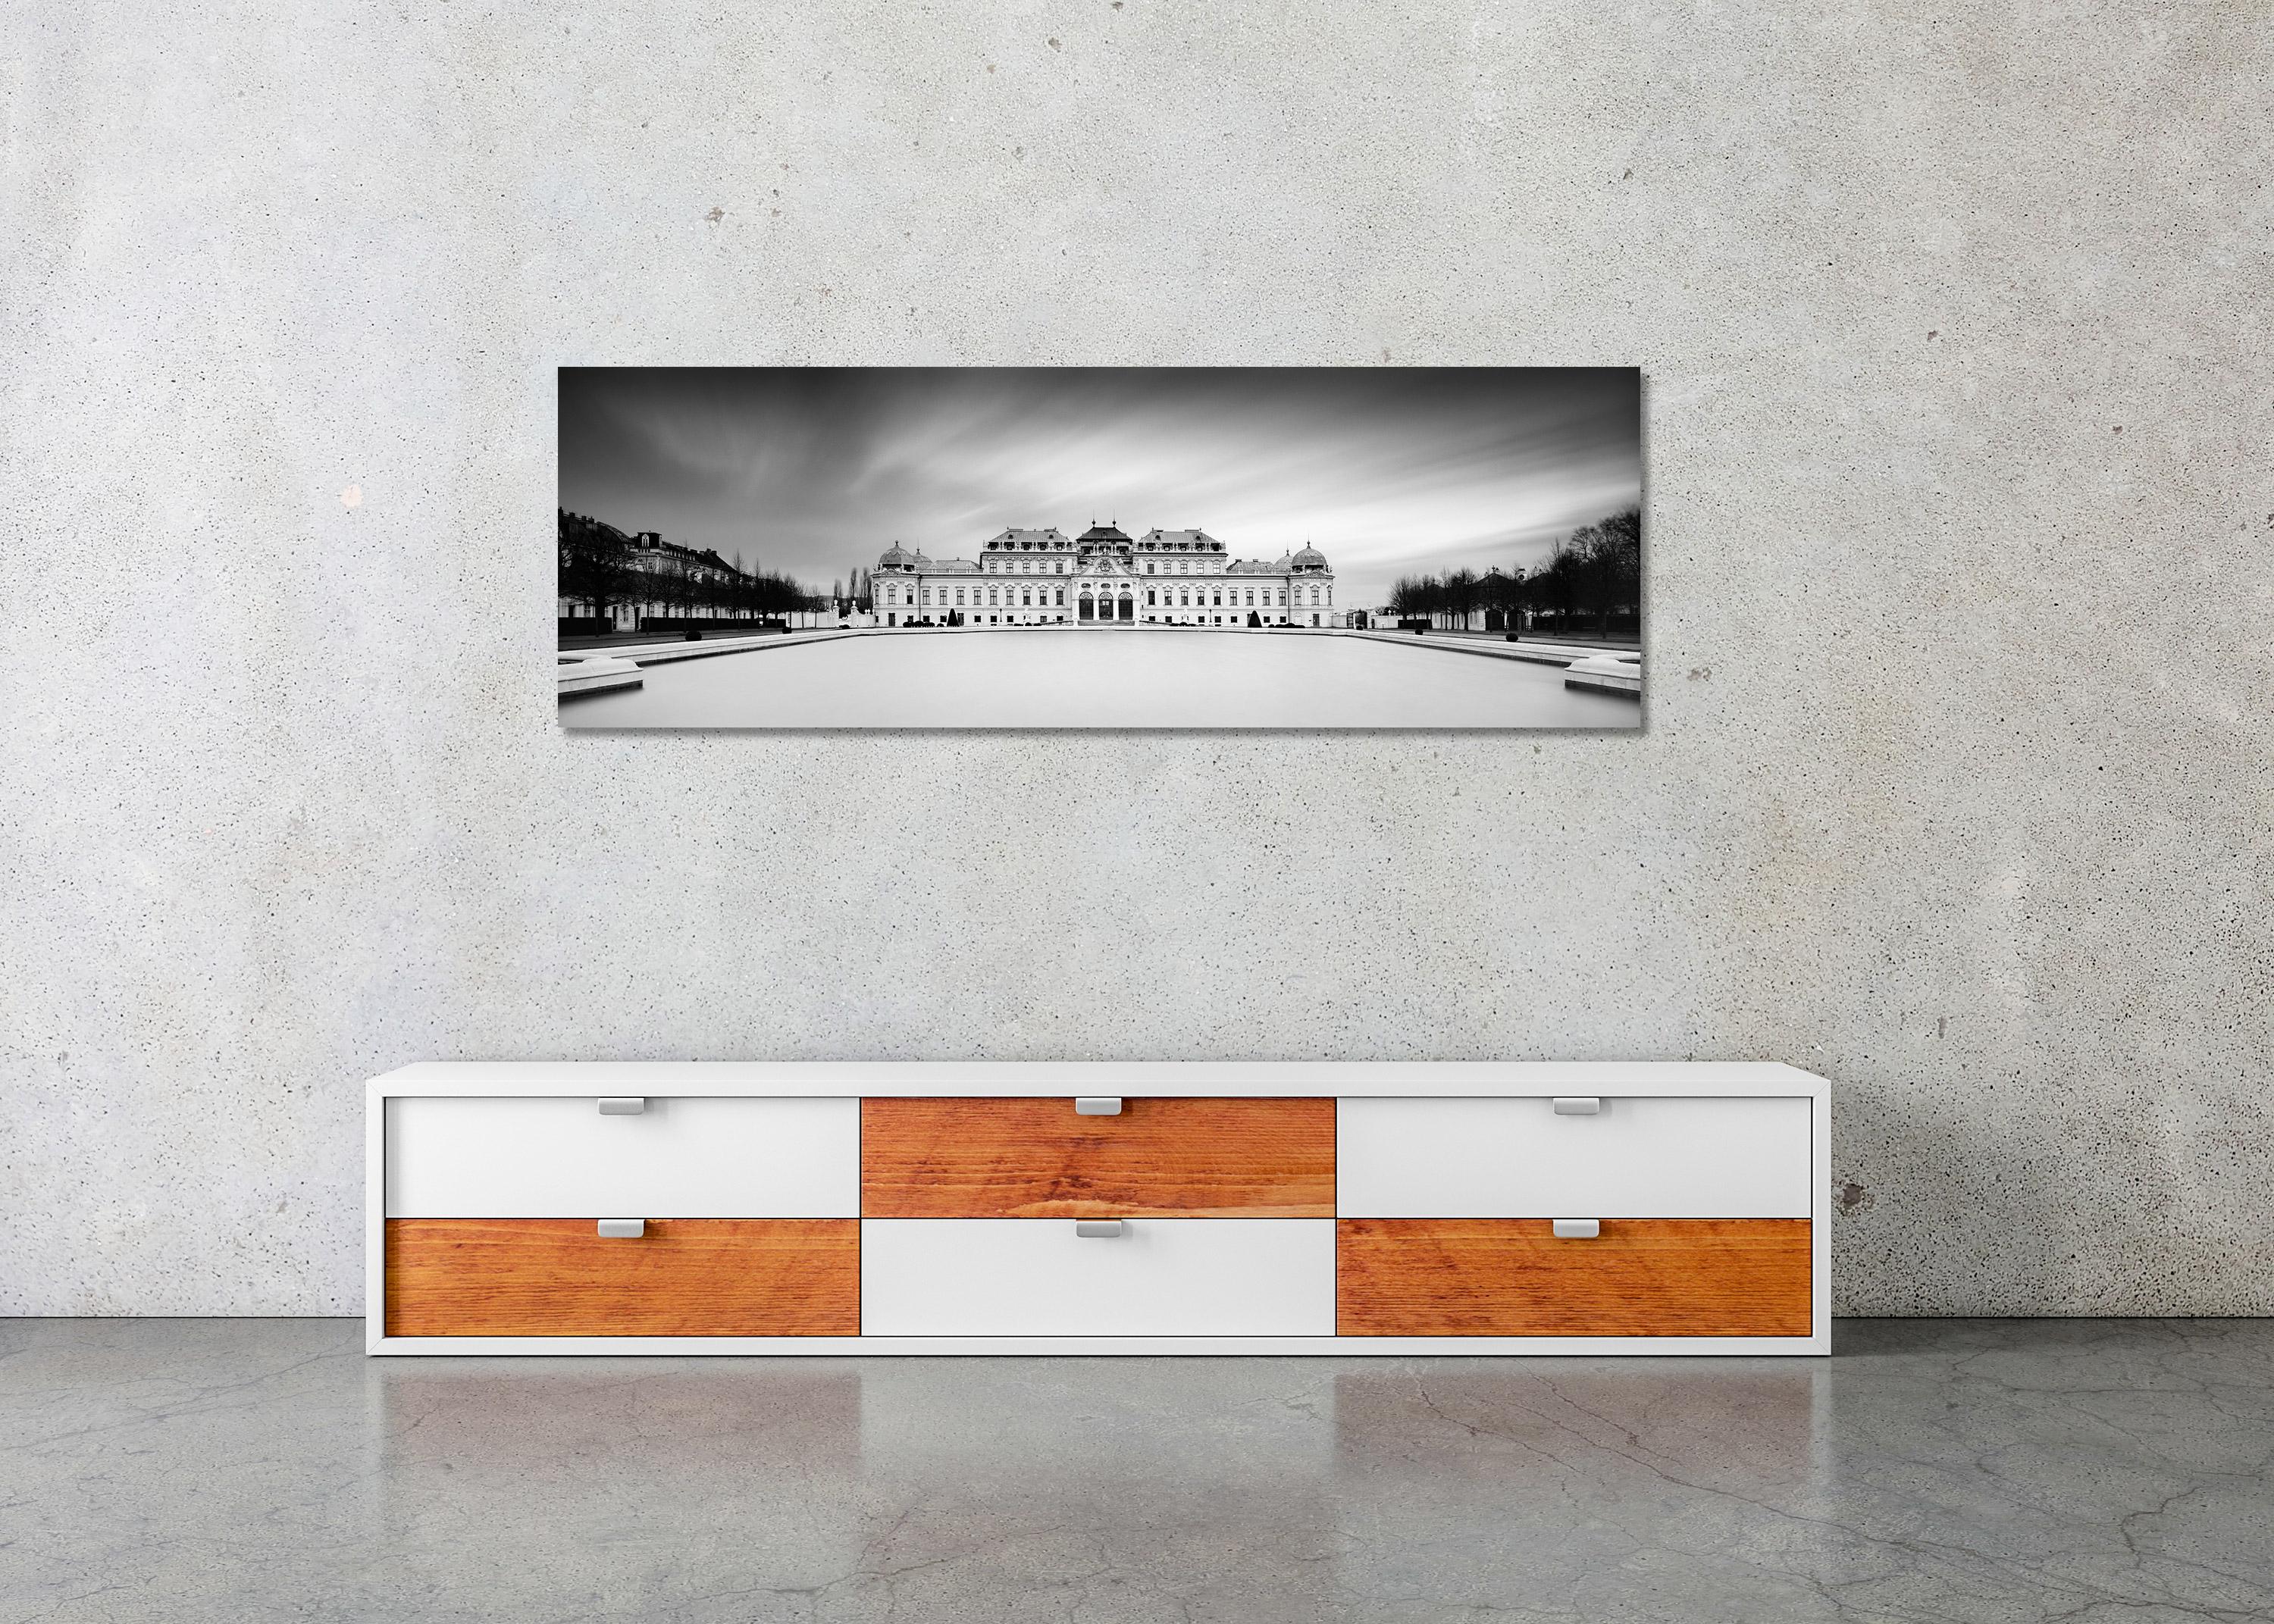 Upper Belvedere palace, Panorama, Vienna, black & white landscape photography - Gray Black and White Photograph by Gerald Berghammer